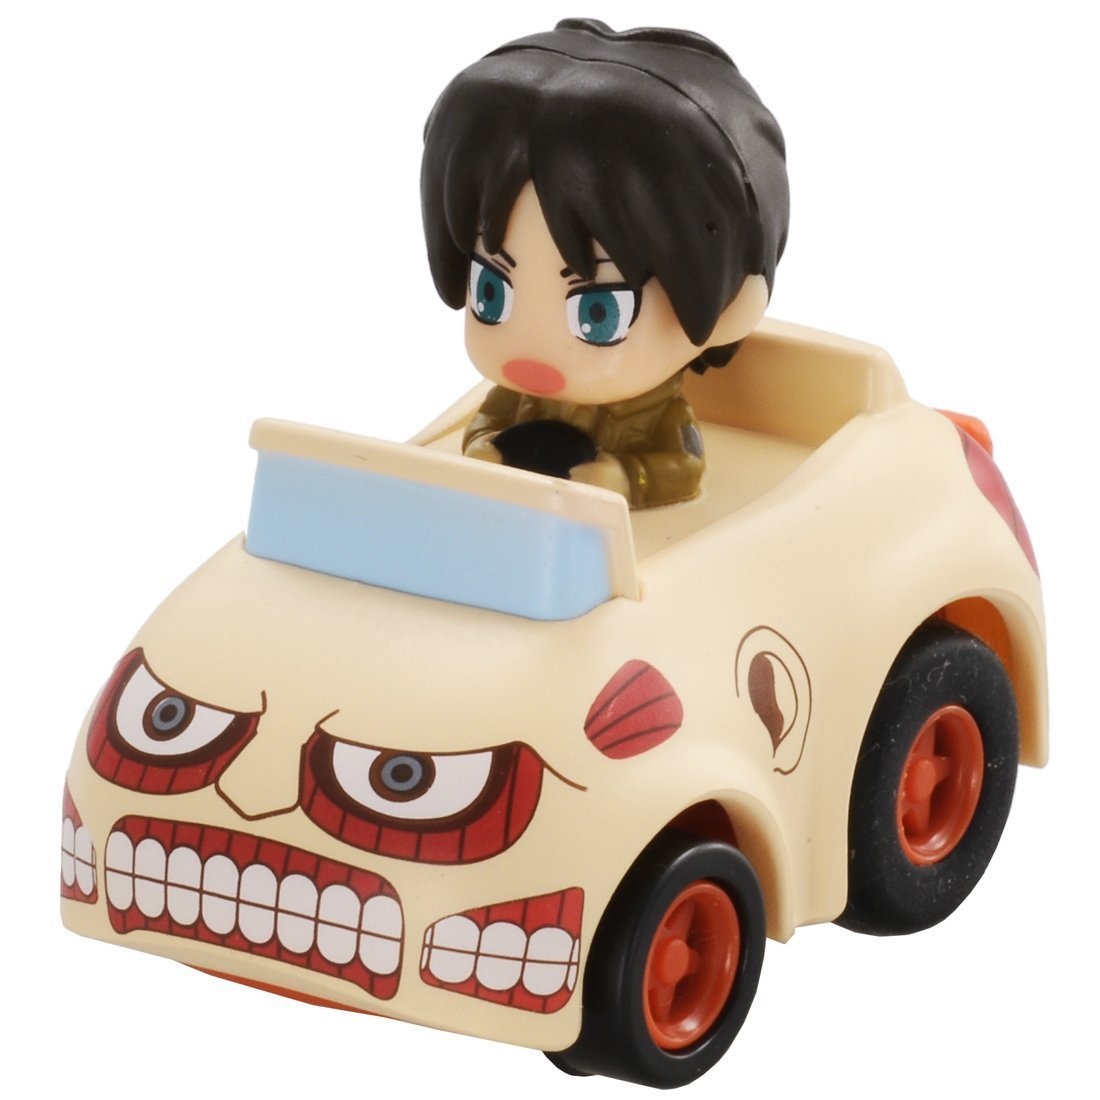 Takara Tomy Toys uploads a video of Eren &amp; Levi’s Choro QMix cars in action!Release